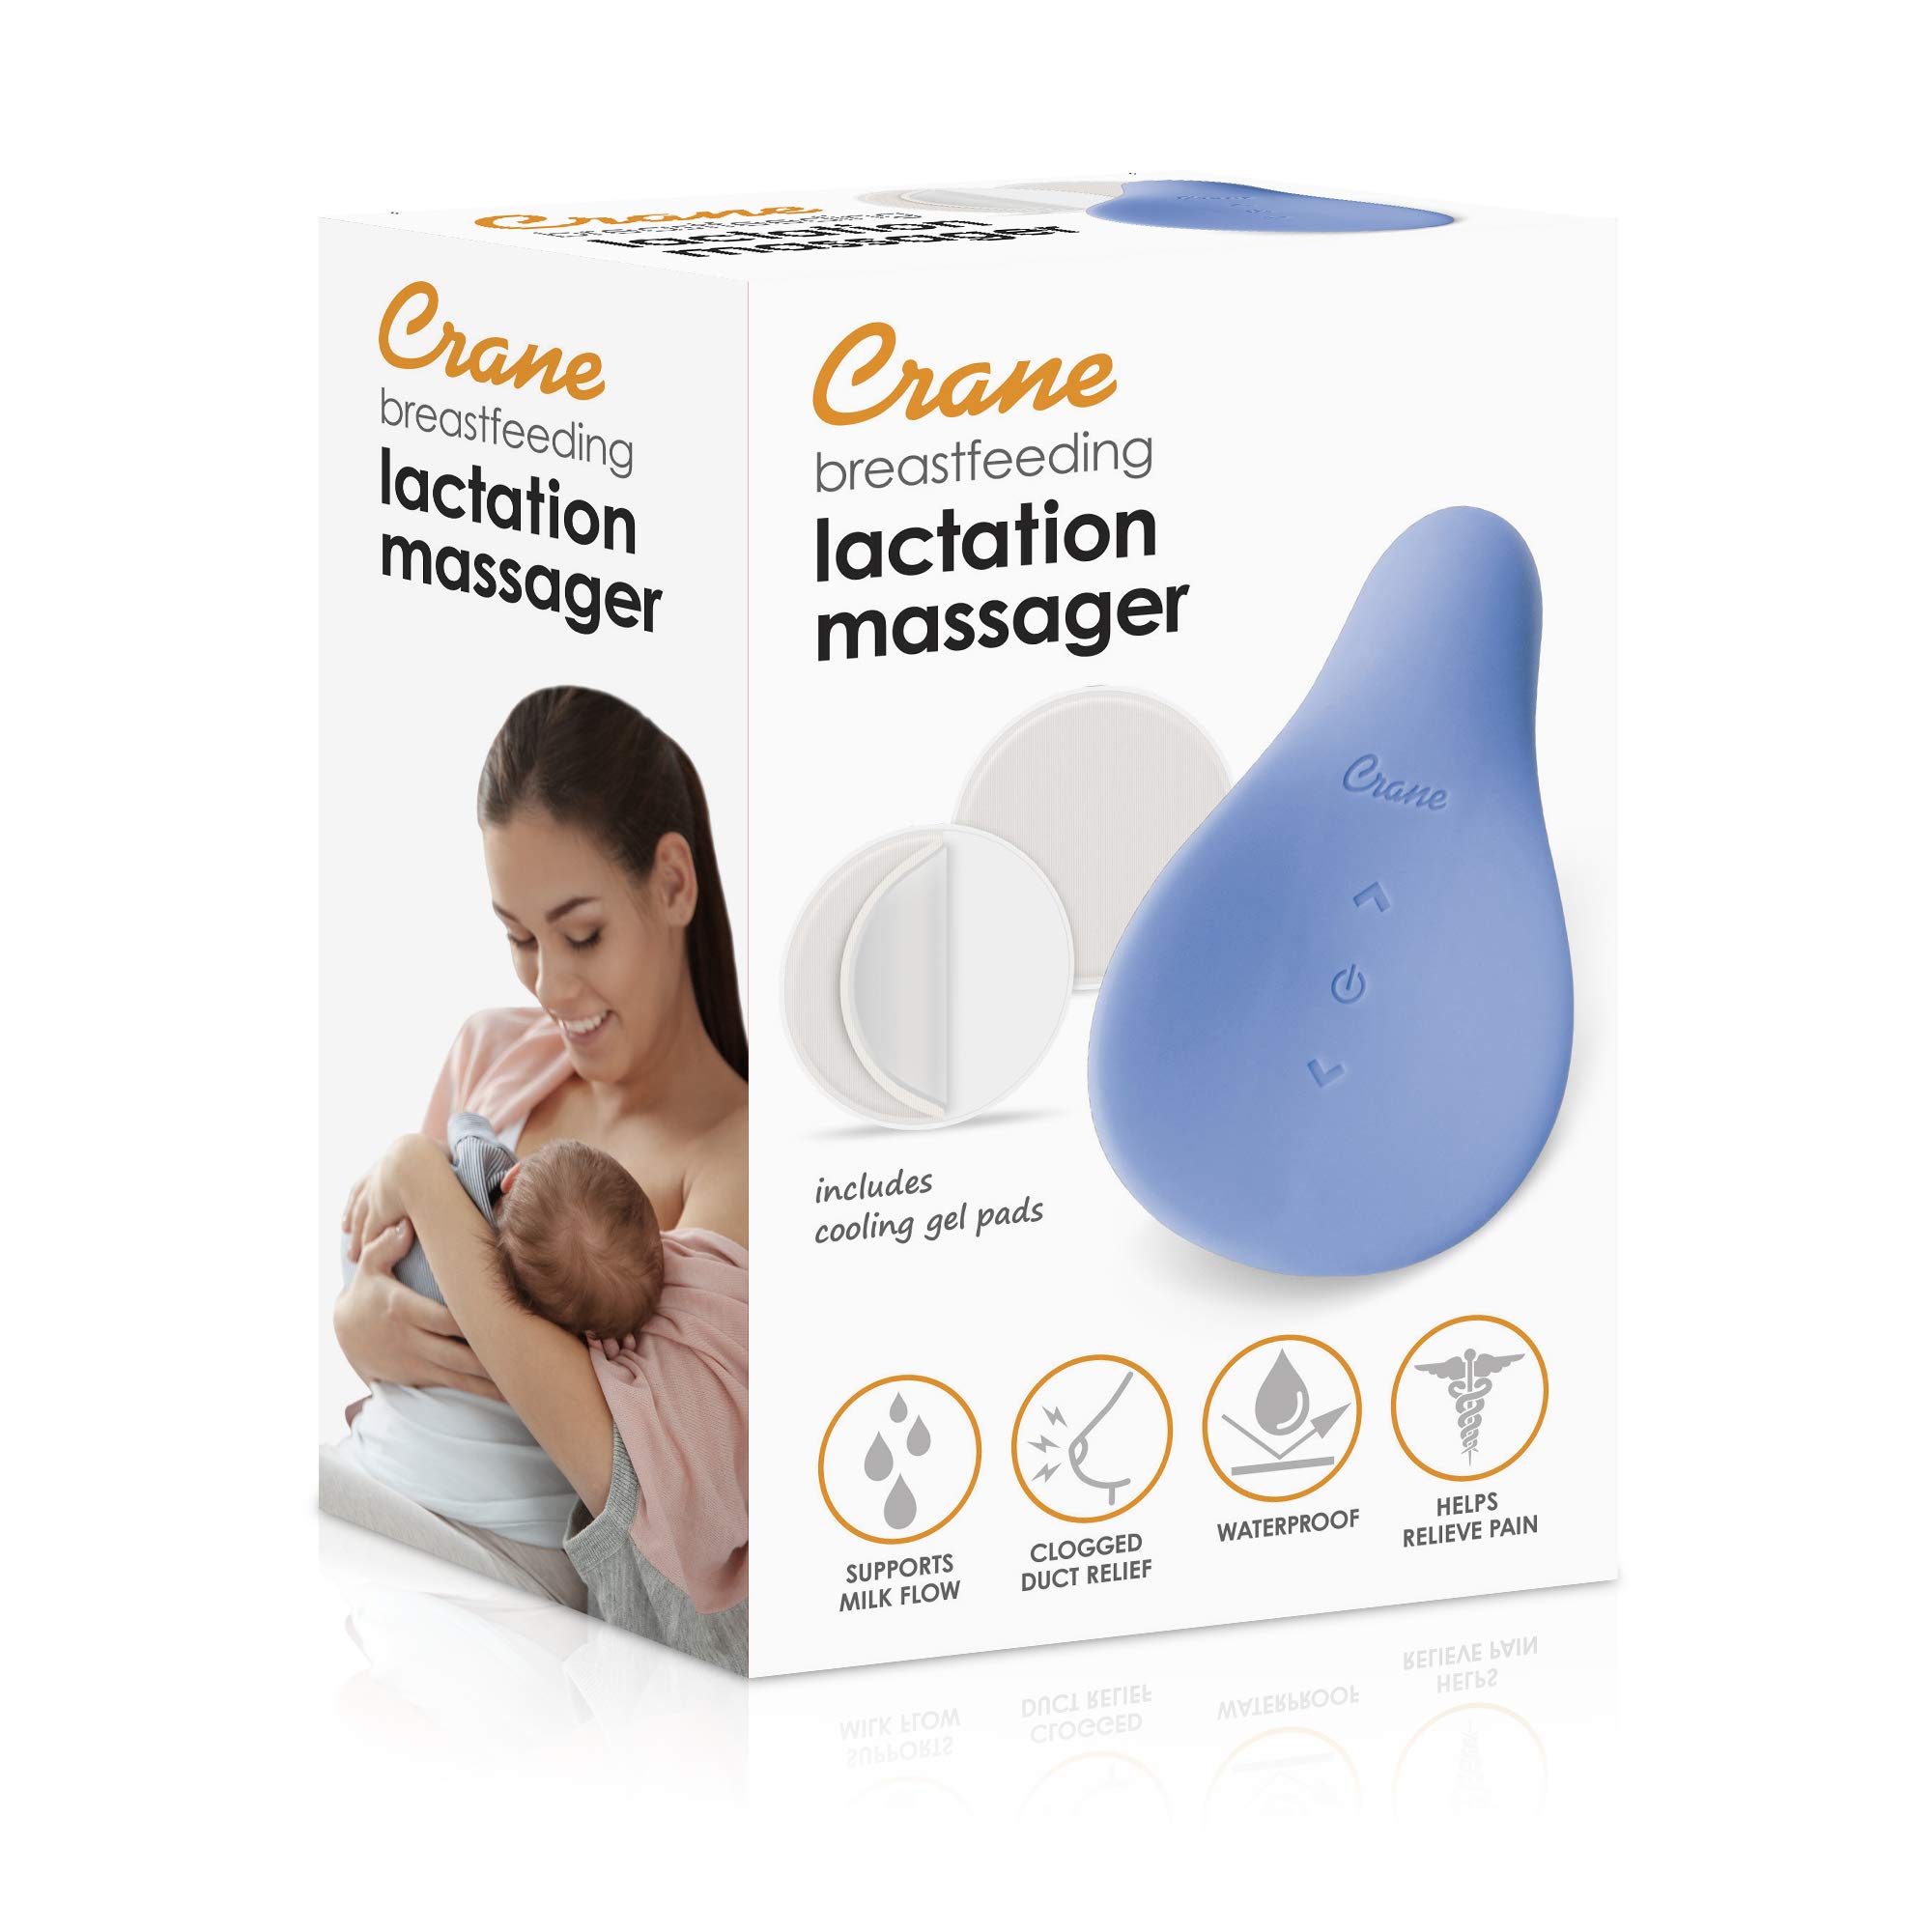 Crane Breast Lactation Massager, Pumping and Breastfeeding Essential, Breast Massager for Added Comfort